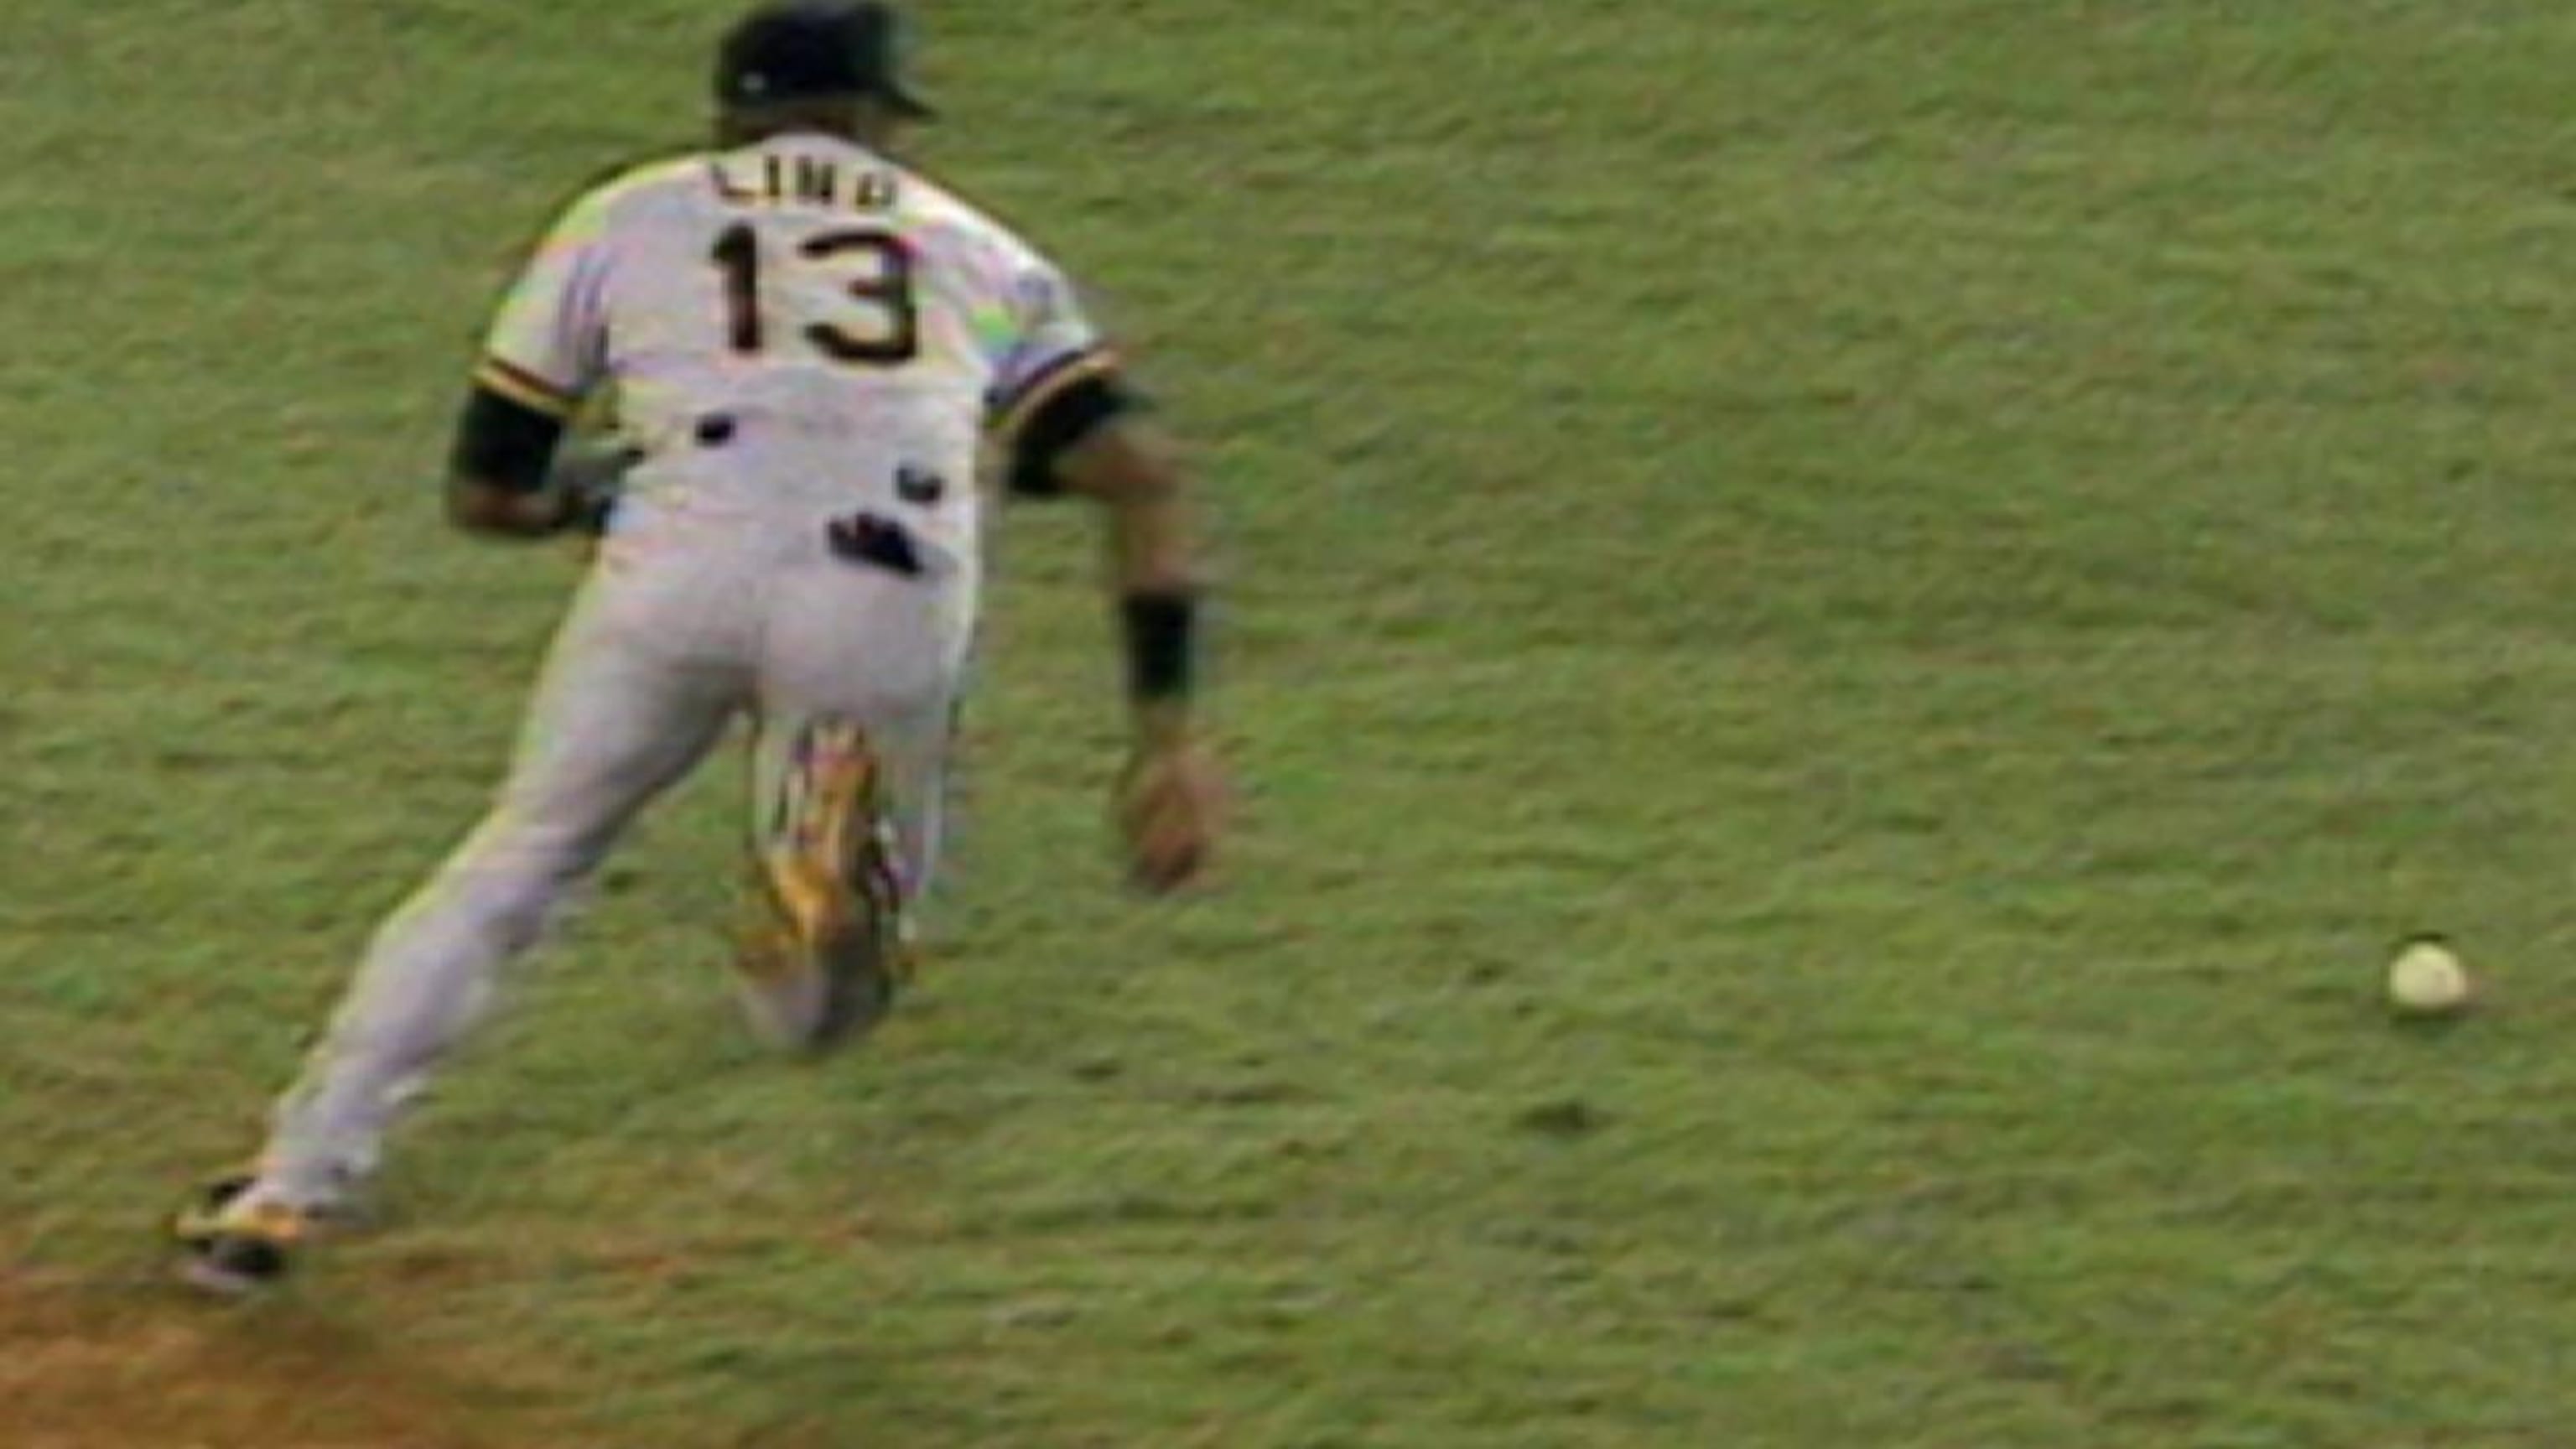 Andy Van Slyke's Best Offensive Moments, A look back at Andy Van Slyke's  the greatest offensive moments., By Pittsburgh Pirates Highlights